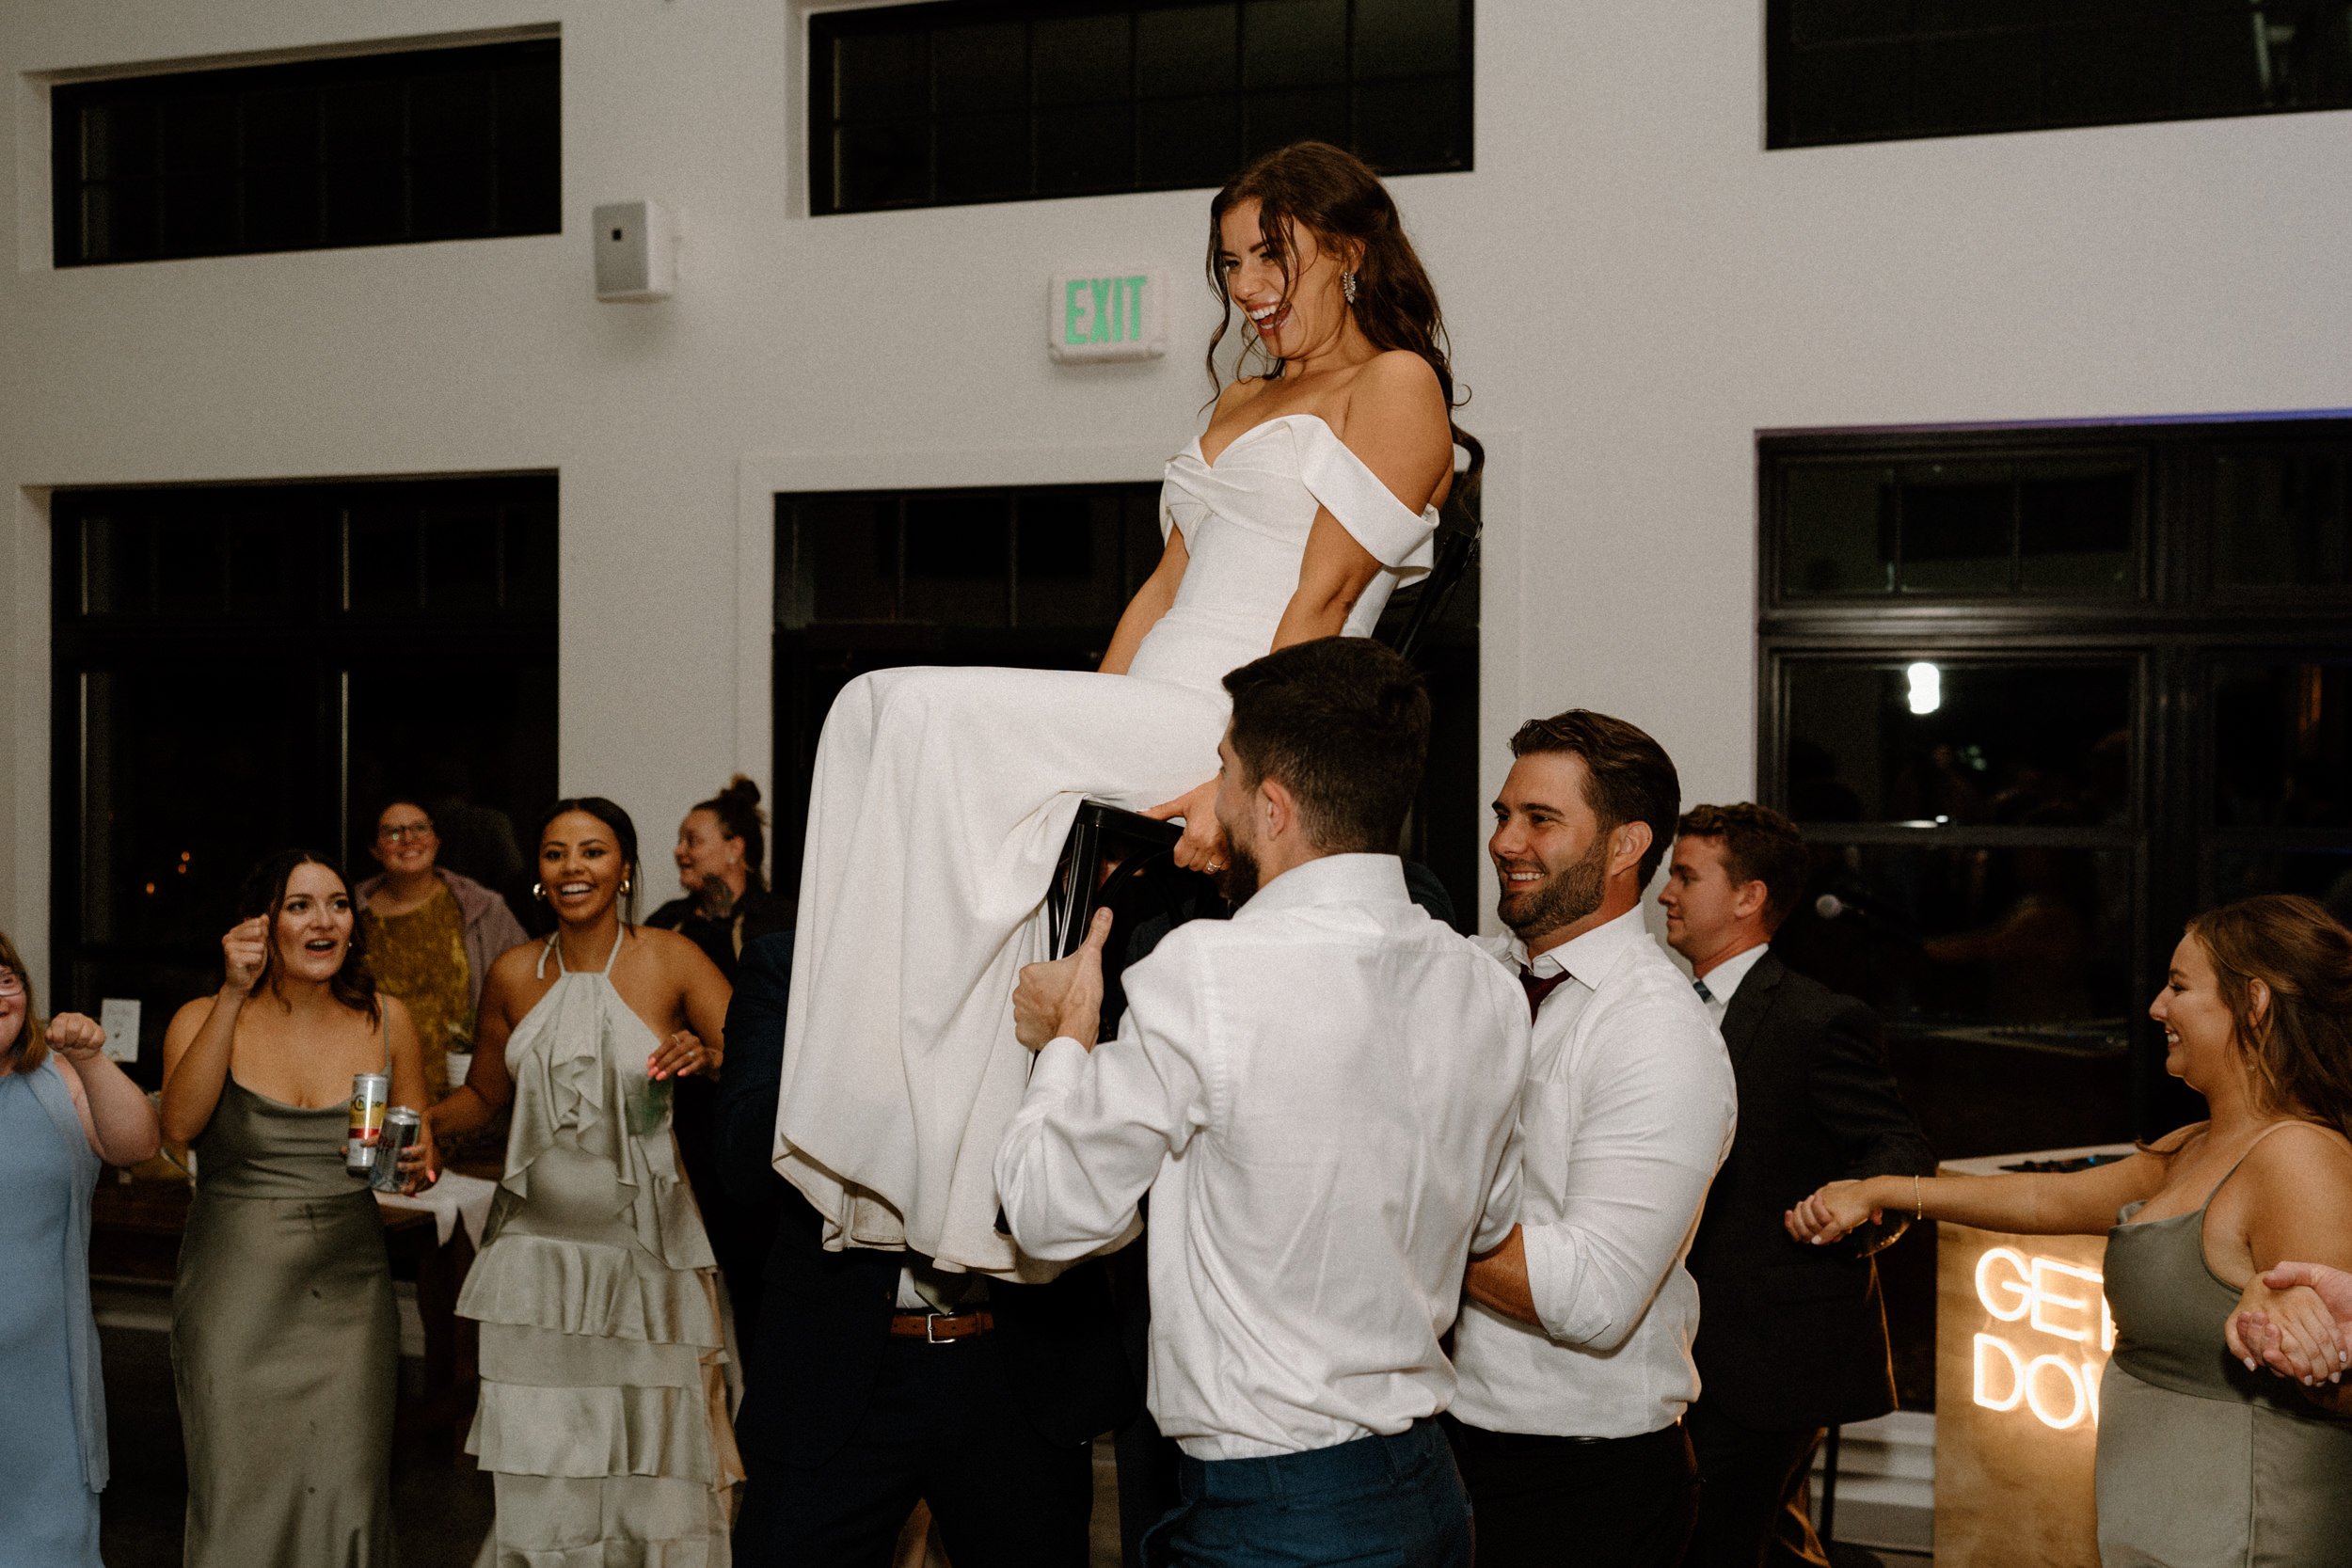 The wedding guests lift the bride in a chair